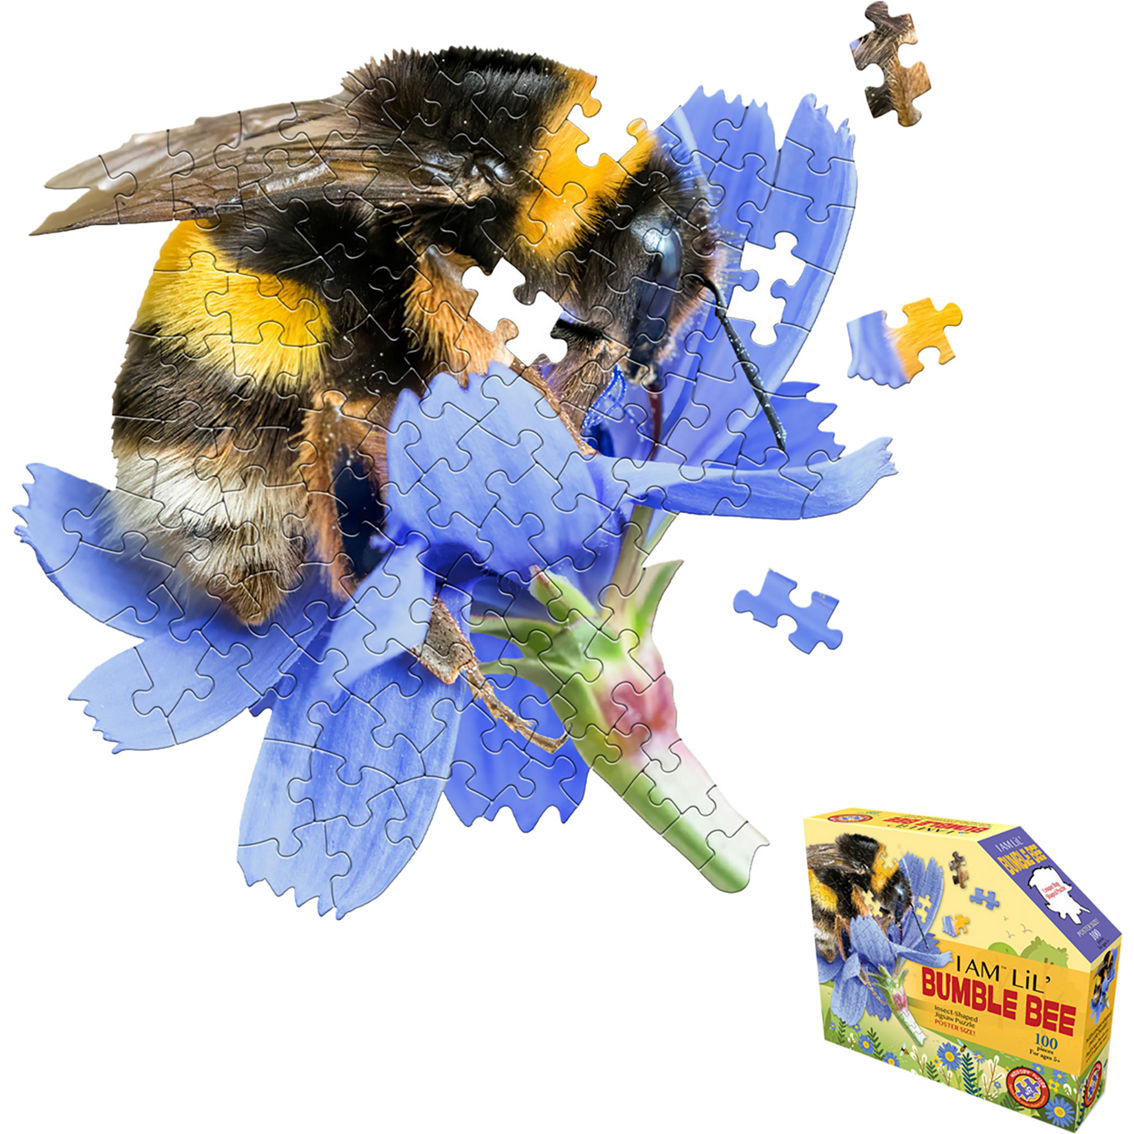 Madd Capp: I Am Lil' Bumble Bee 100 pc Puzzle - Image 3 of 4